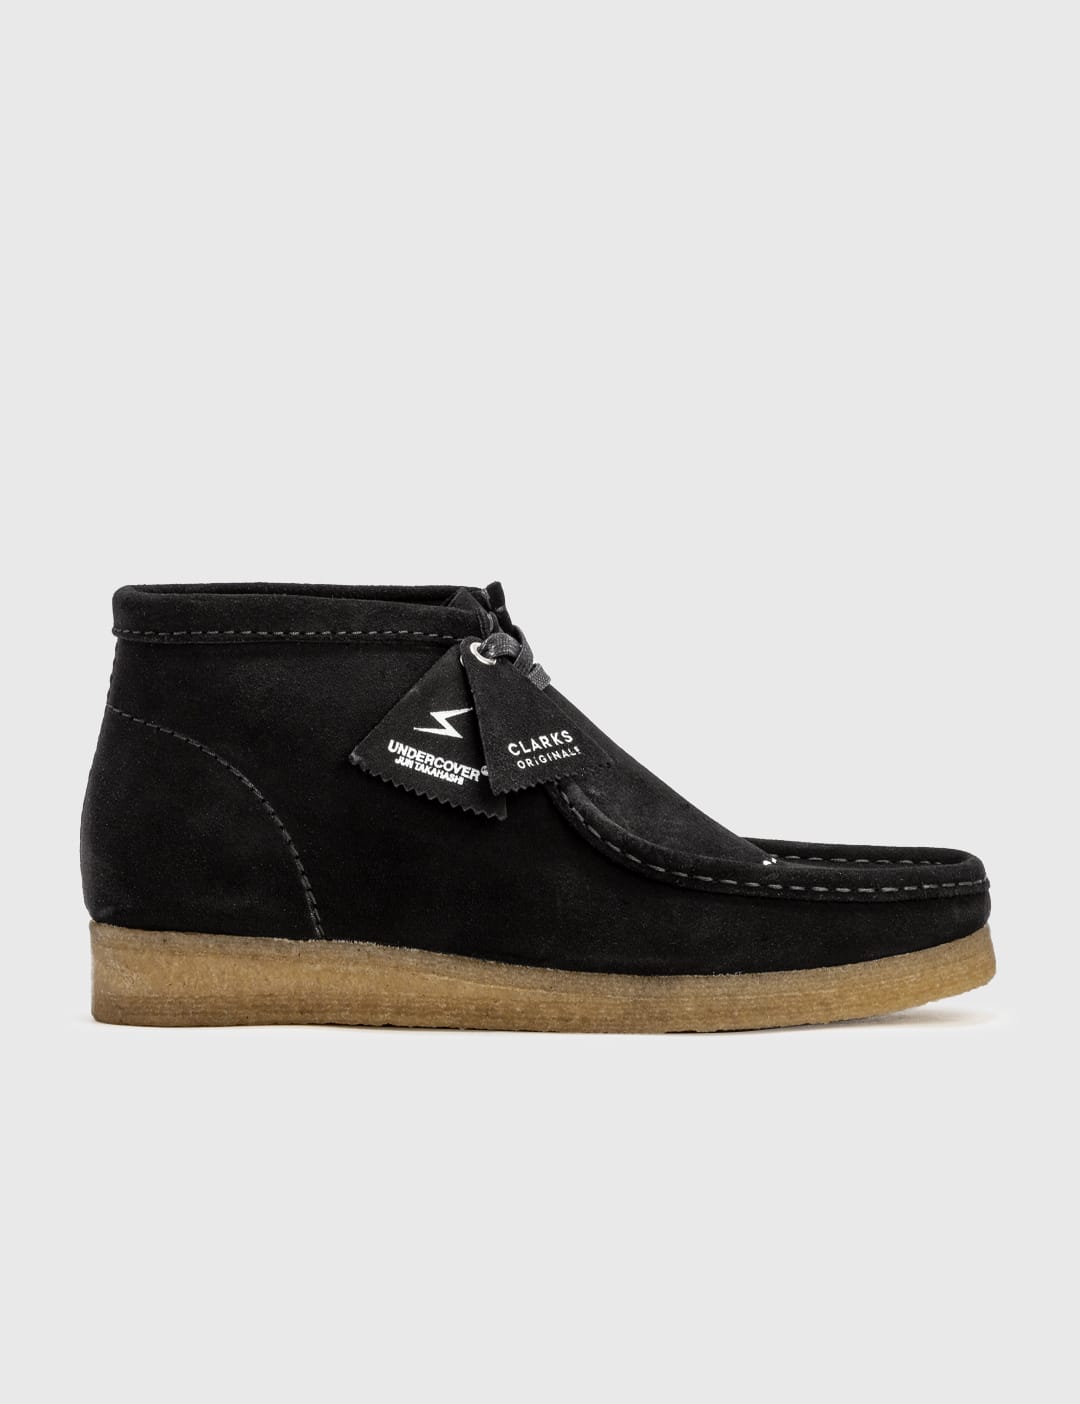 UNDERCOVER x Clarks Wallabee Boot